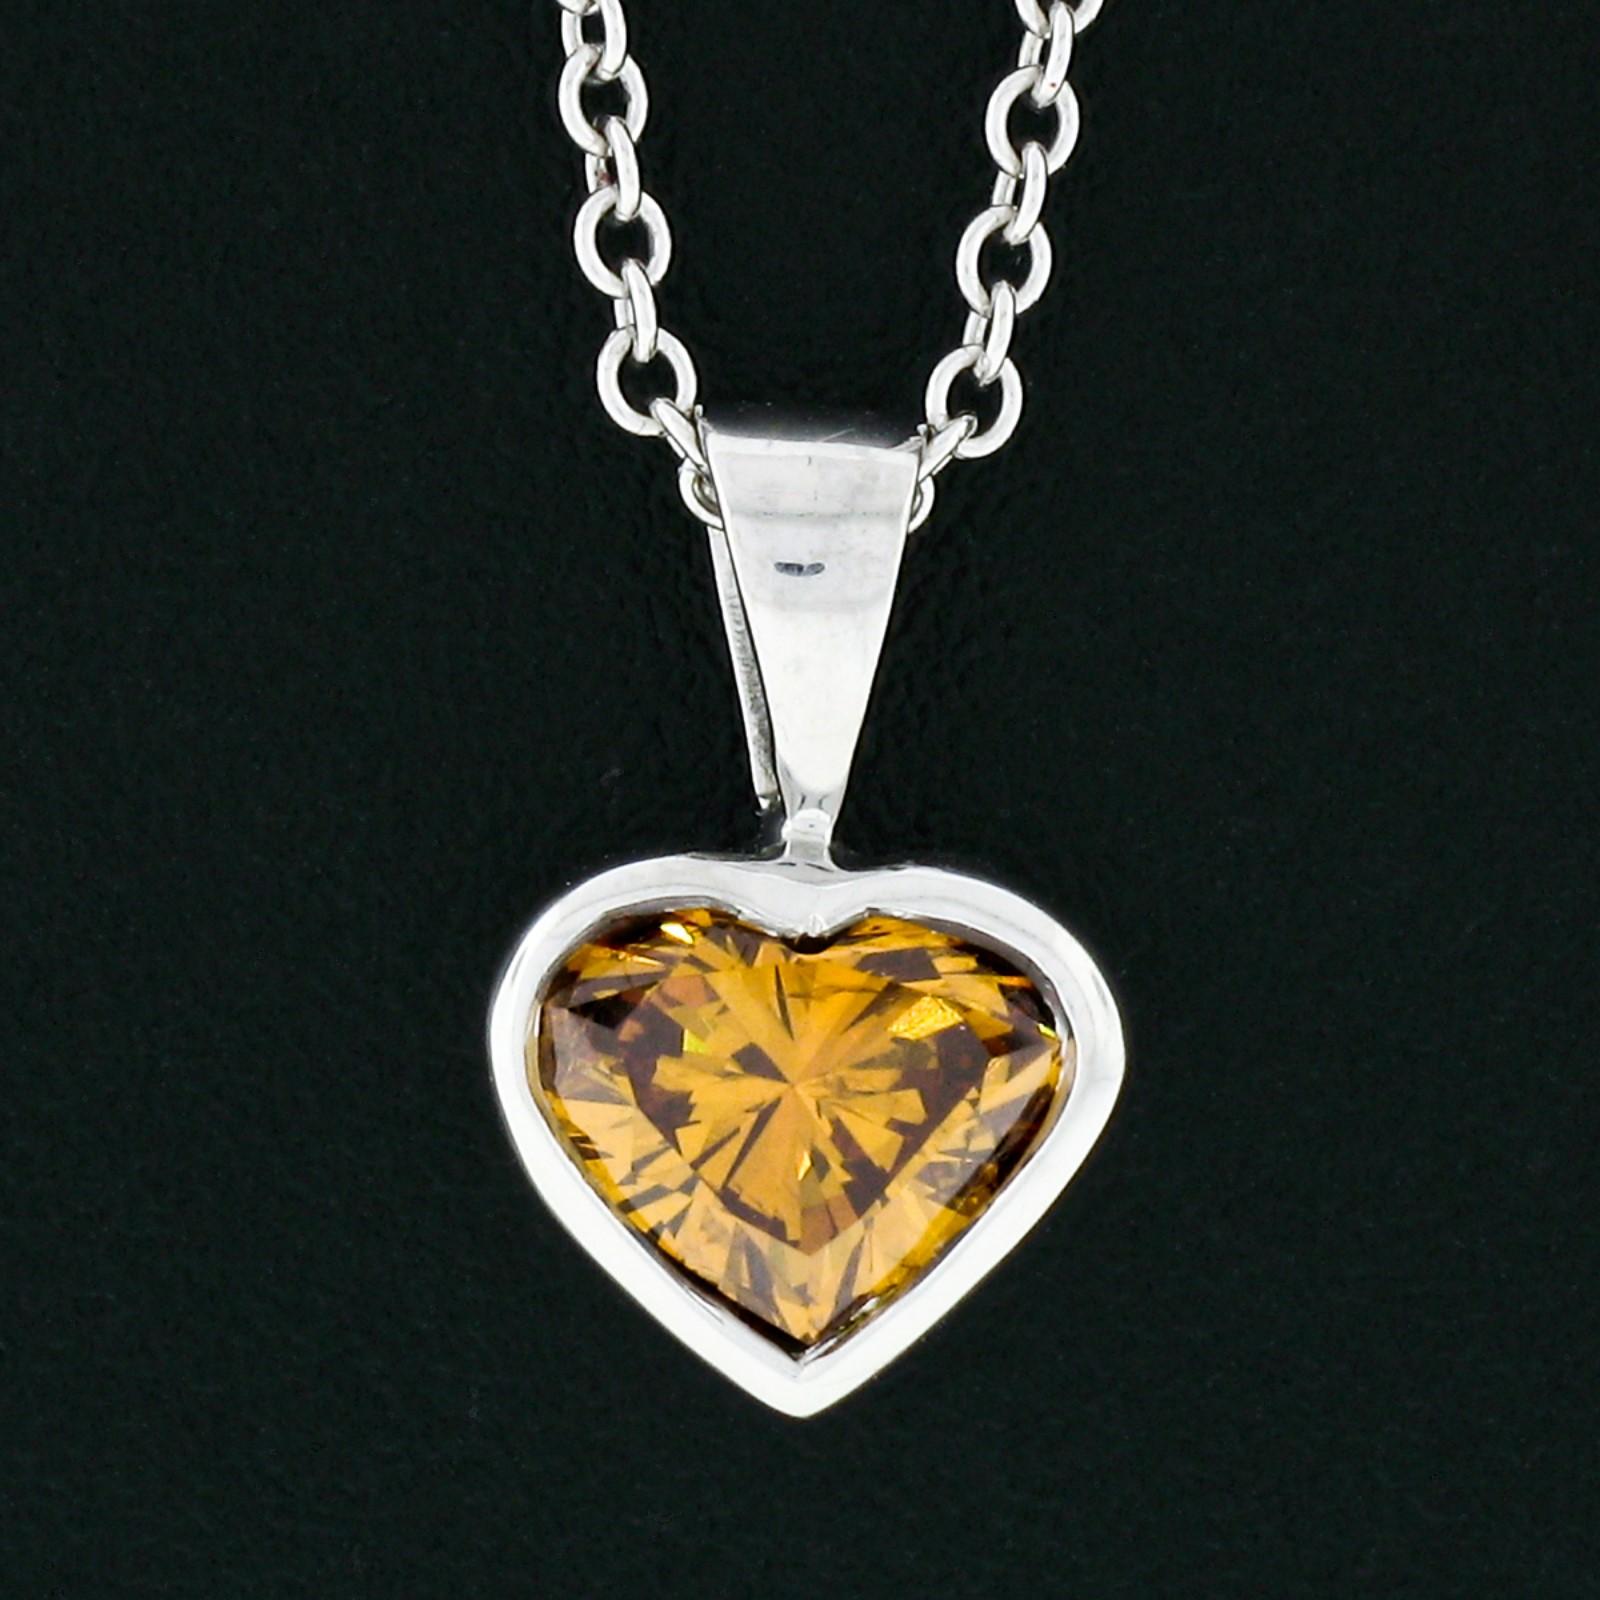 This stunning heart diamond pendant is crafted in solid 14k white gold and features a gorgeous GIA certified diamond weighing exactly 0.70 carats. The diamond has a natural and even fancy deep brown-orange color and is beautifully and neatly bezel